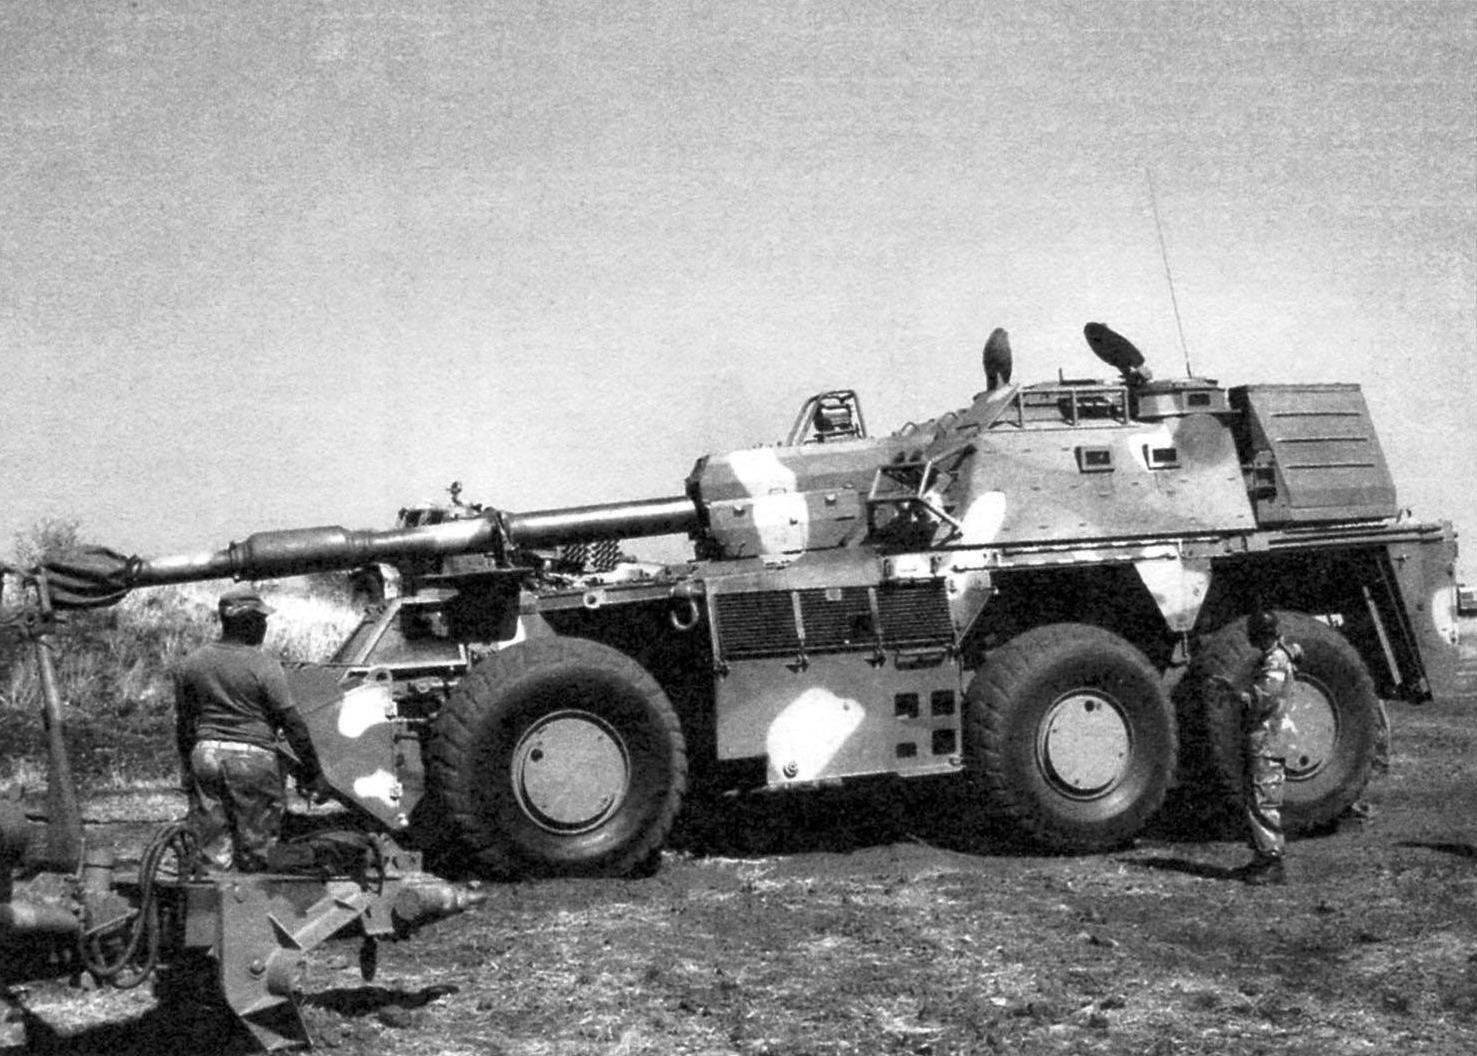 The South African G6 SPG Phino. Armed with long-range 155-mm howitzer and a 12.7 mm machine gun. Vehicle weight is 47 tonnes, road speed of 85 km